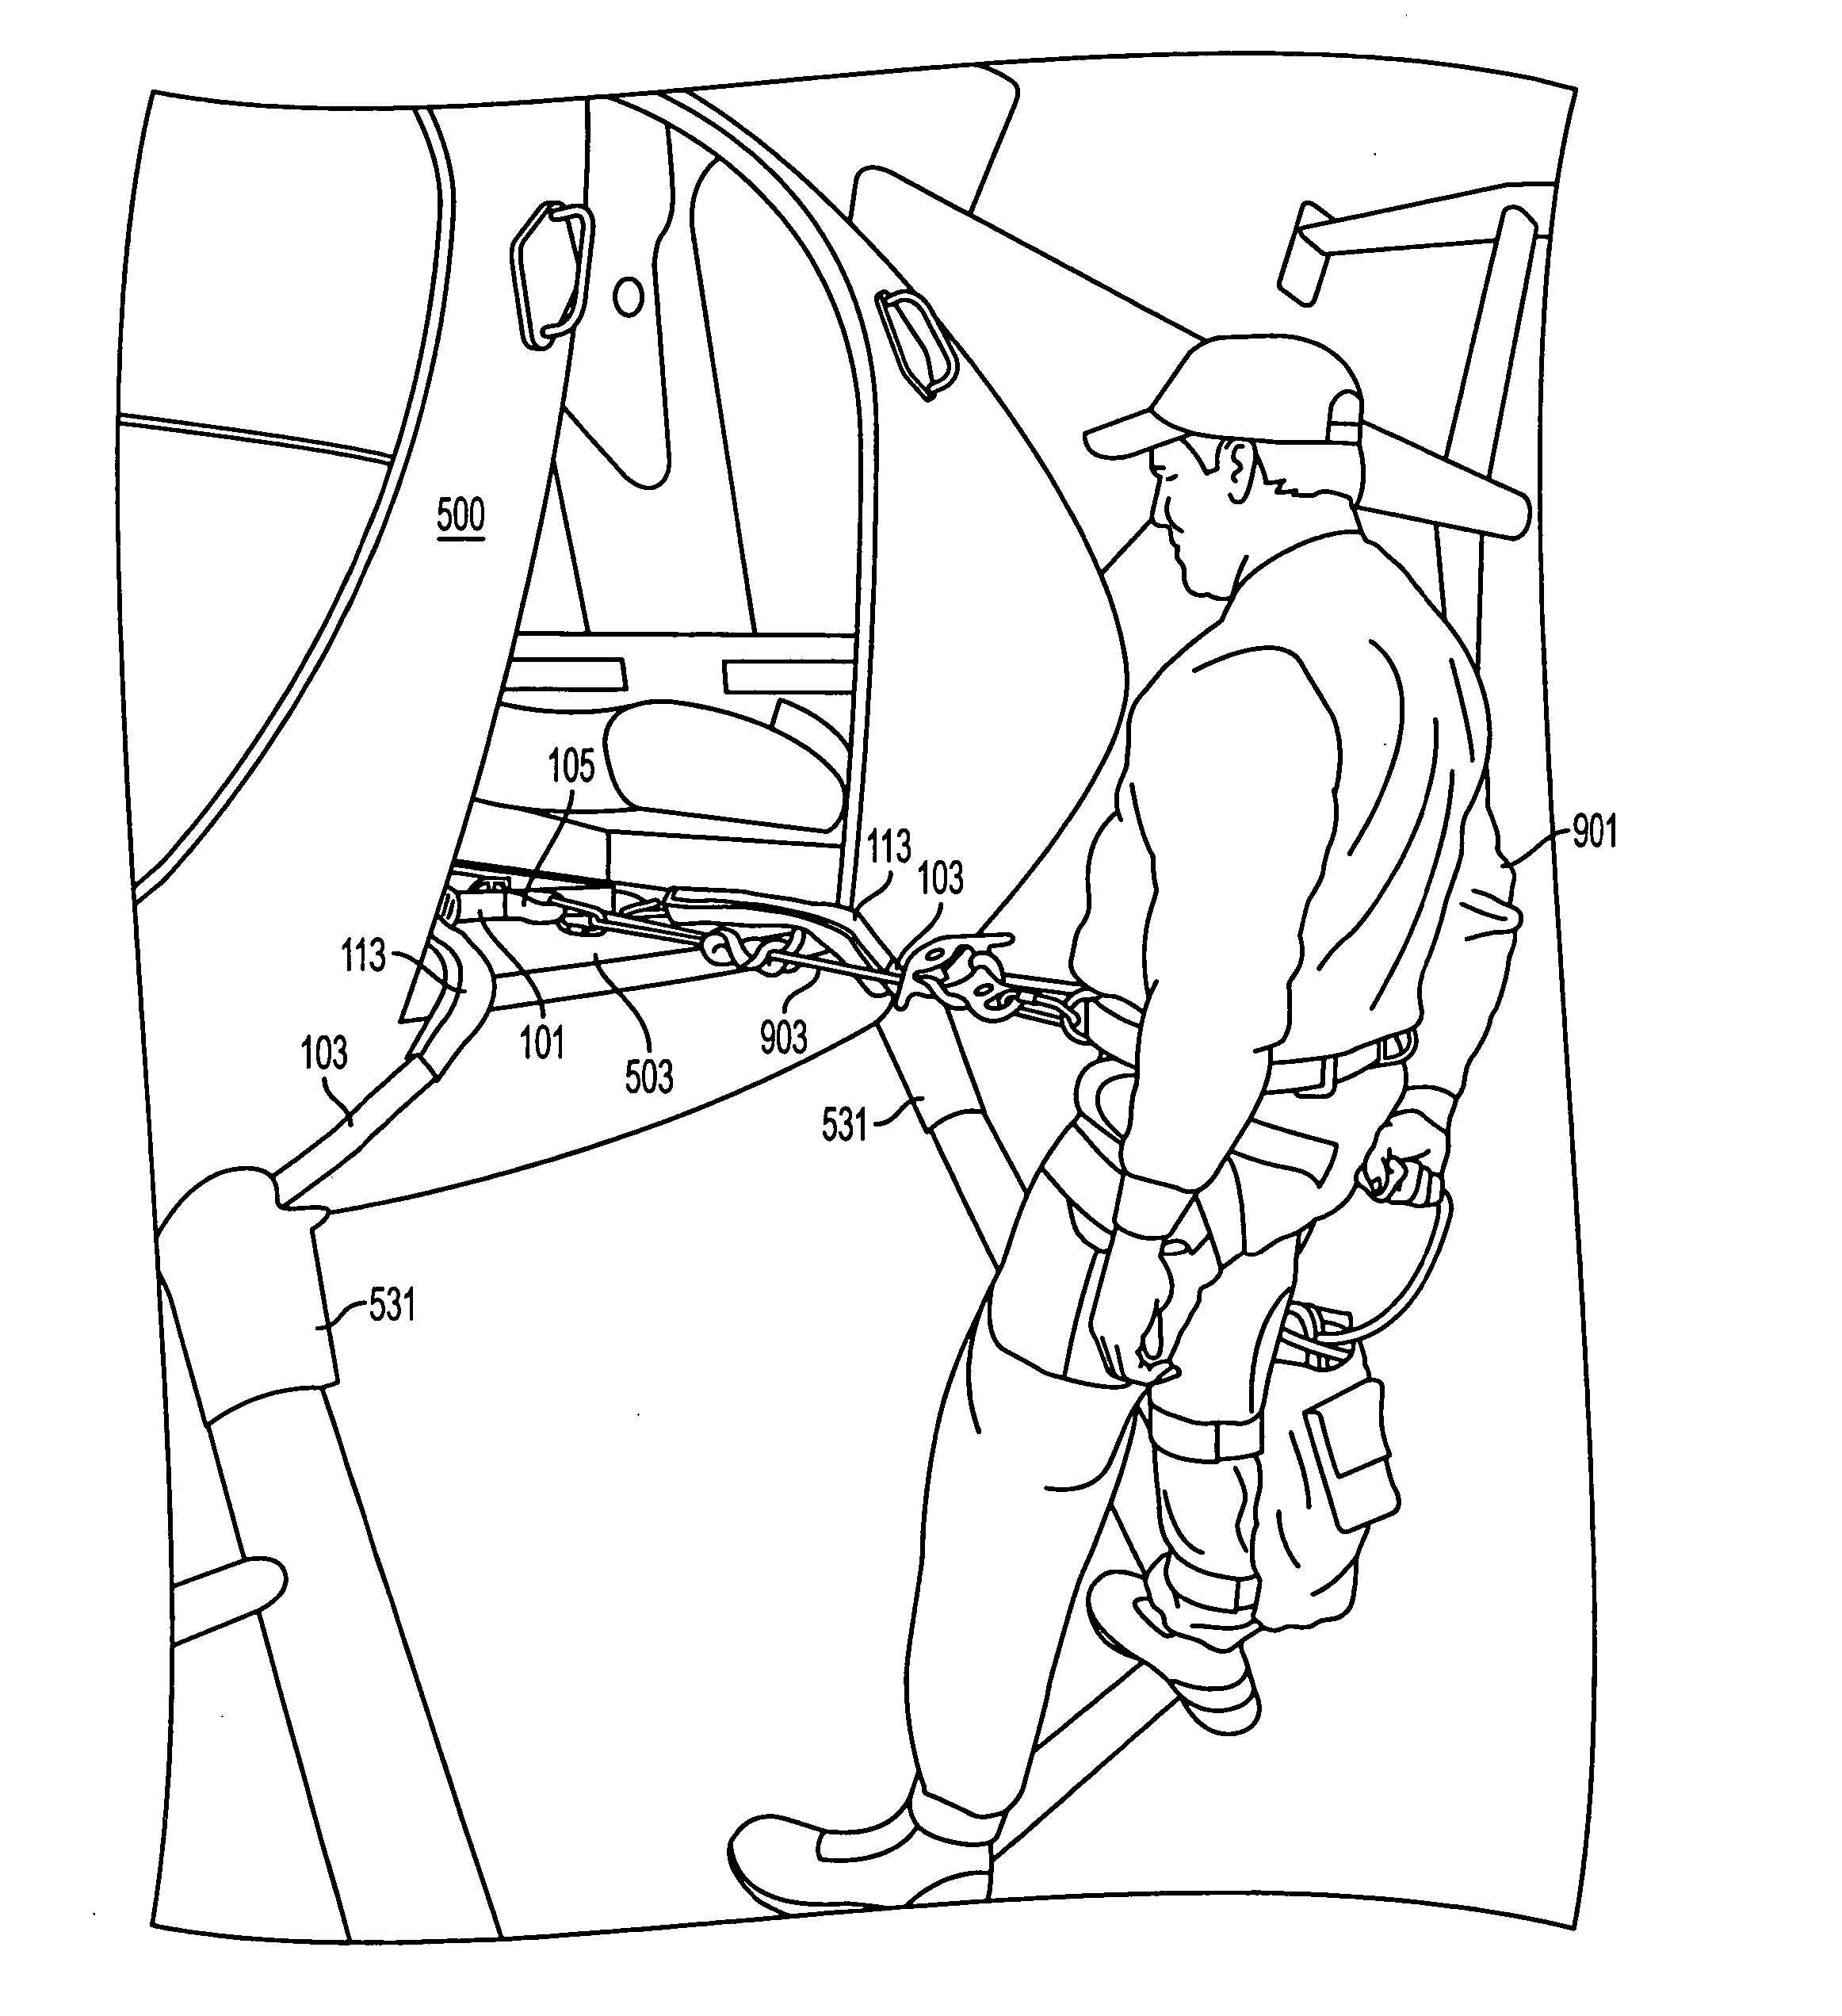 Rappelling rig and method of using same